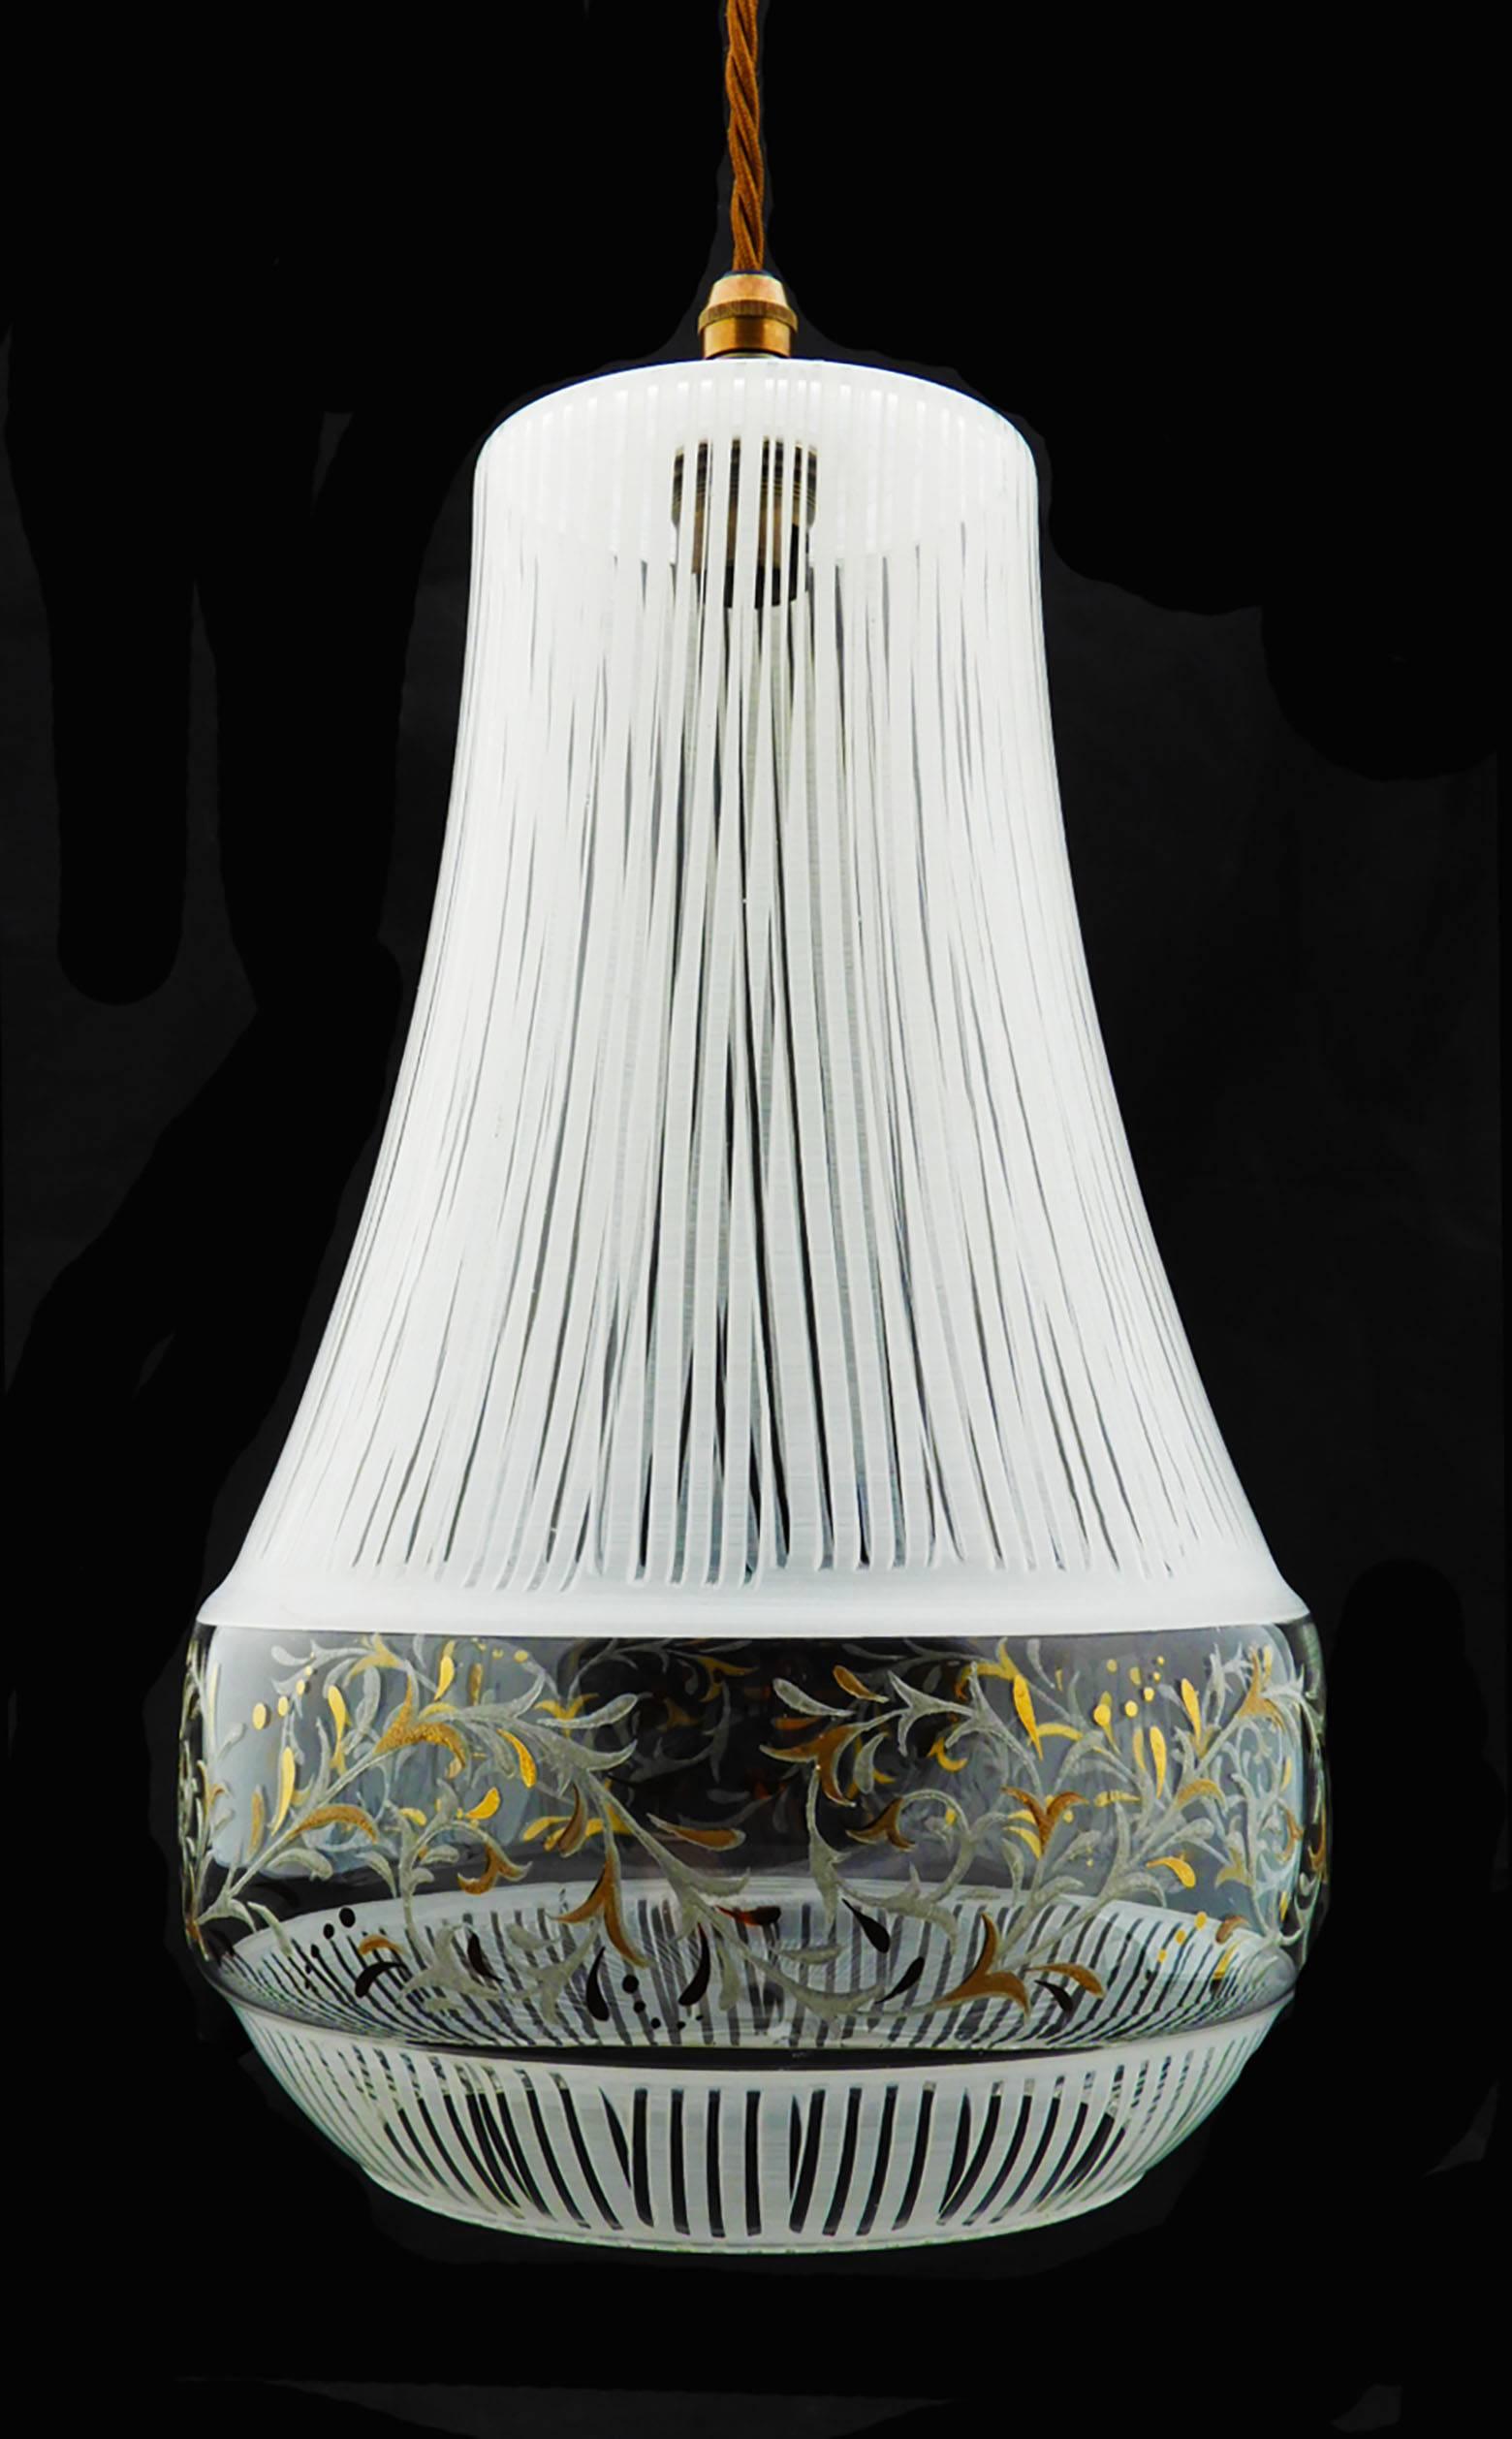 Unusual midcentury glass hand decorated pendant light, France, 1960s
A Classic form with a simple white striped decoration and delicate leaf pattern in silver and gold.
In good vintage original condition with no losses to glass.
This will be